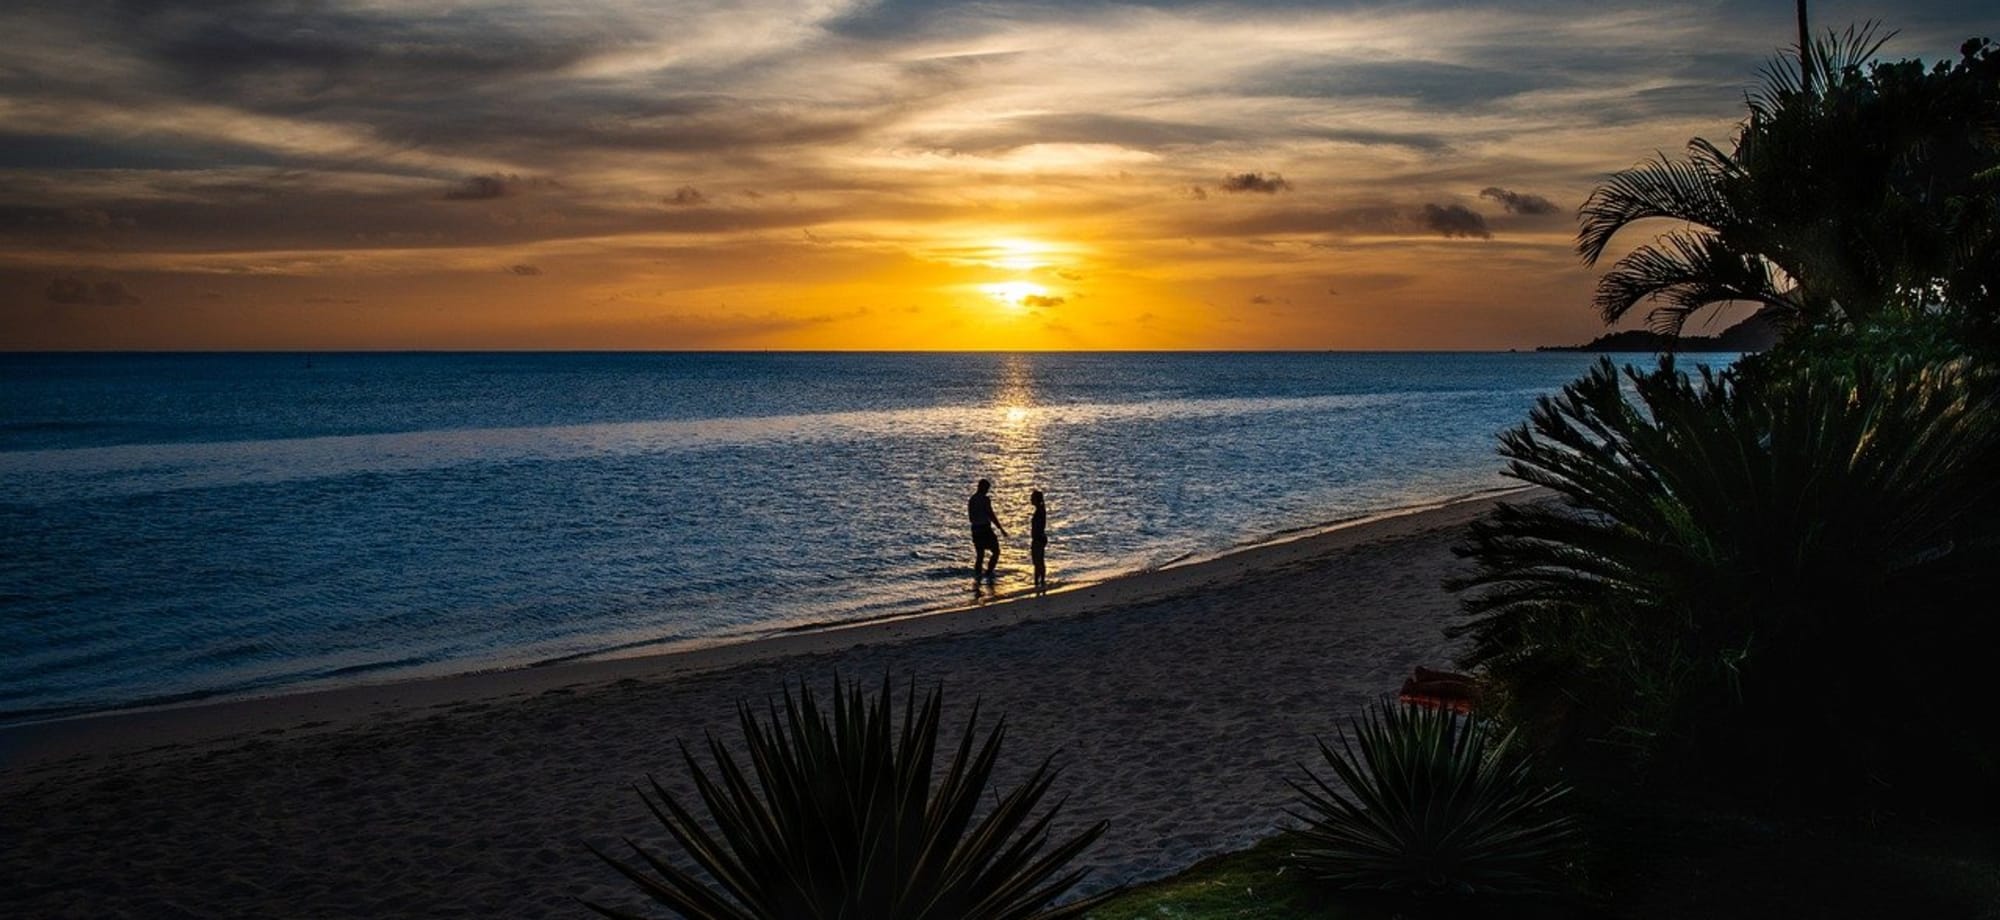 A couple are walking along a beach at night when the sun is setting. 